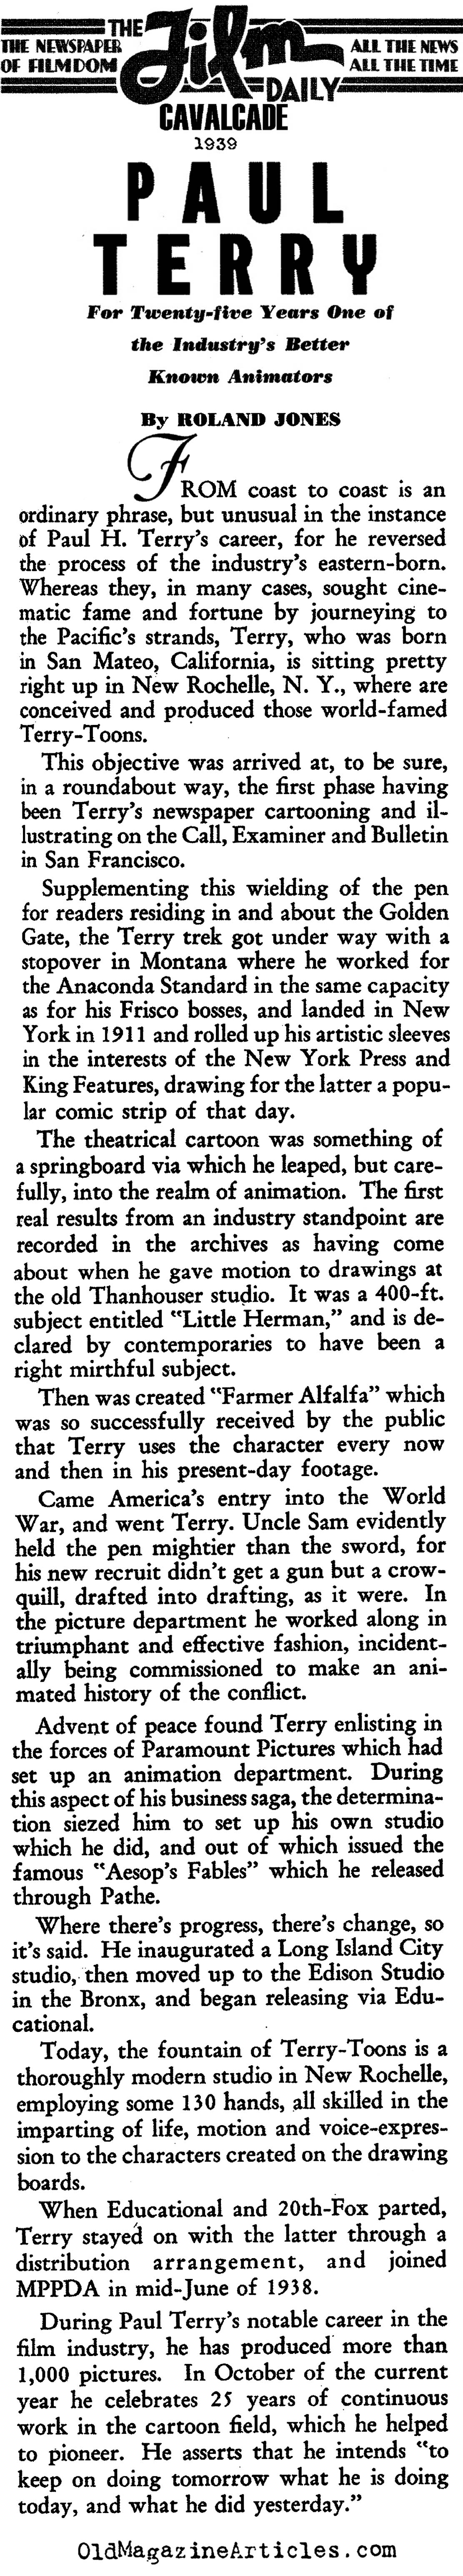 Paul Terry: The Other Animator  (Film Daily, 1939)